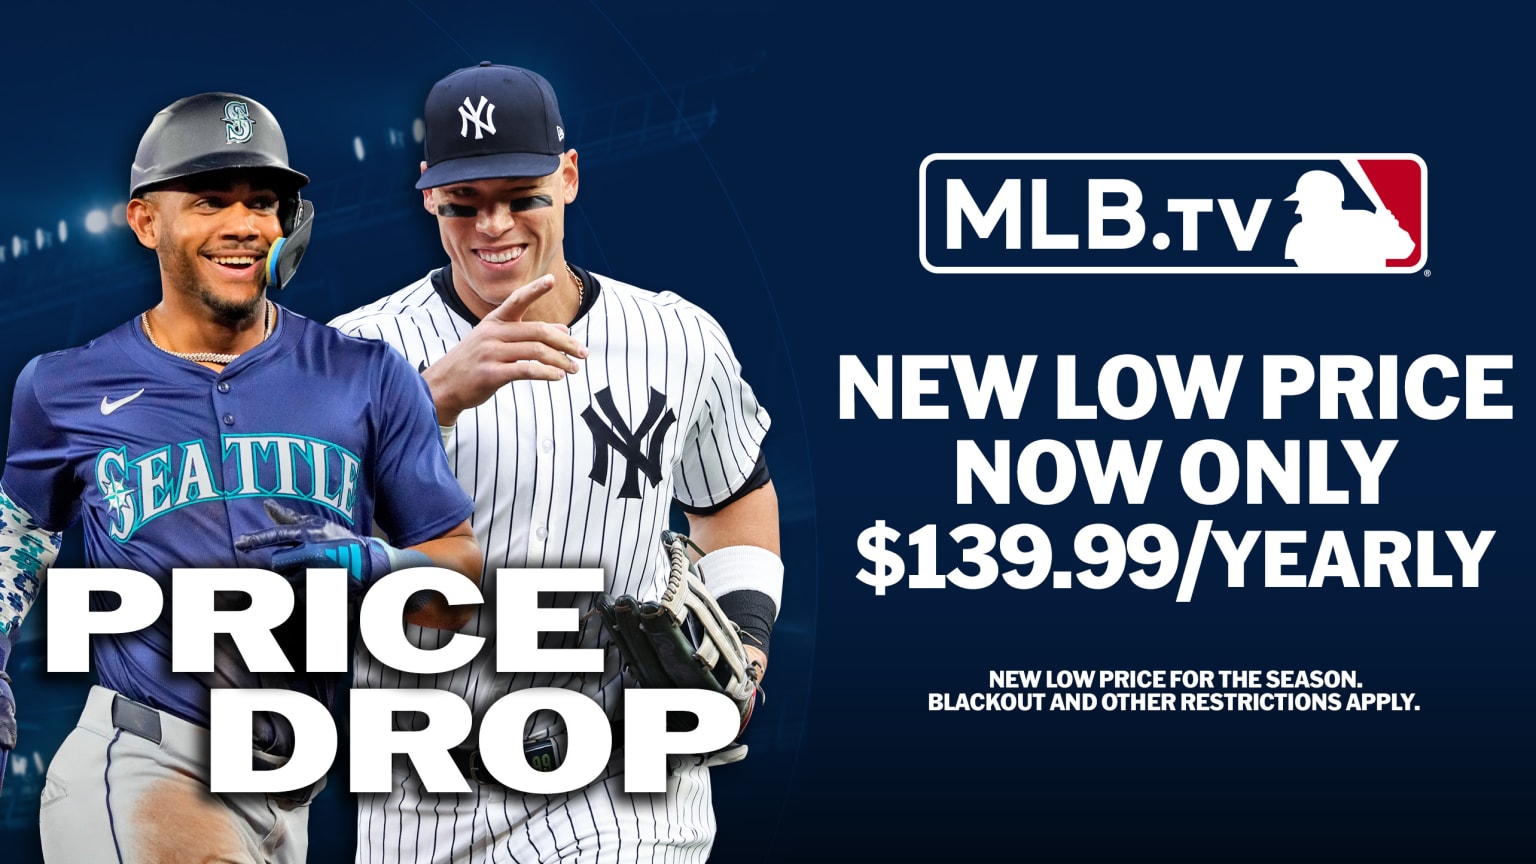 MLB.TV is now available for a lower price